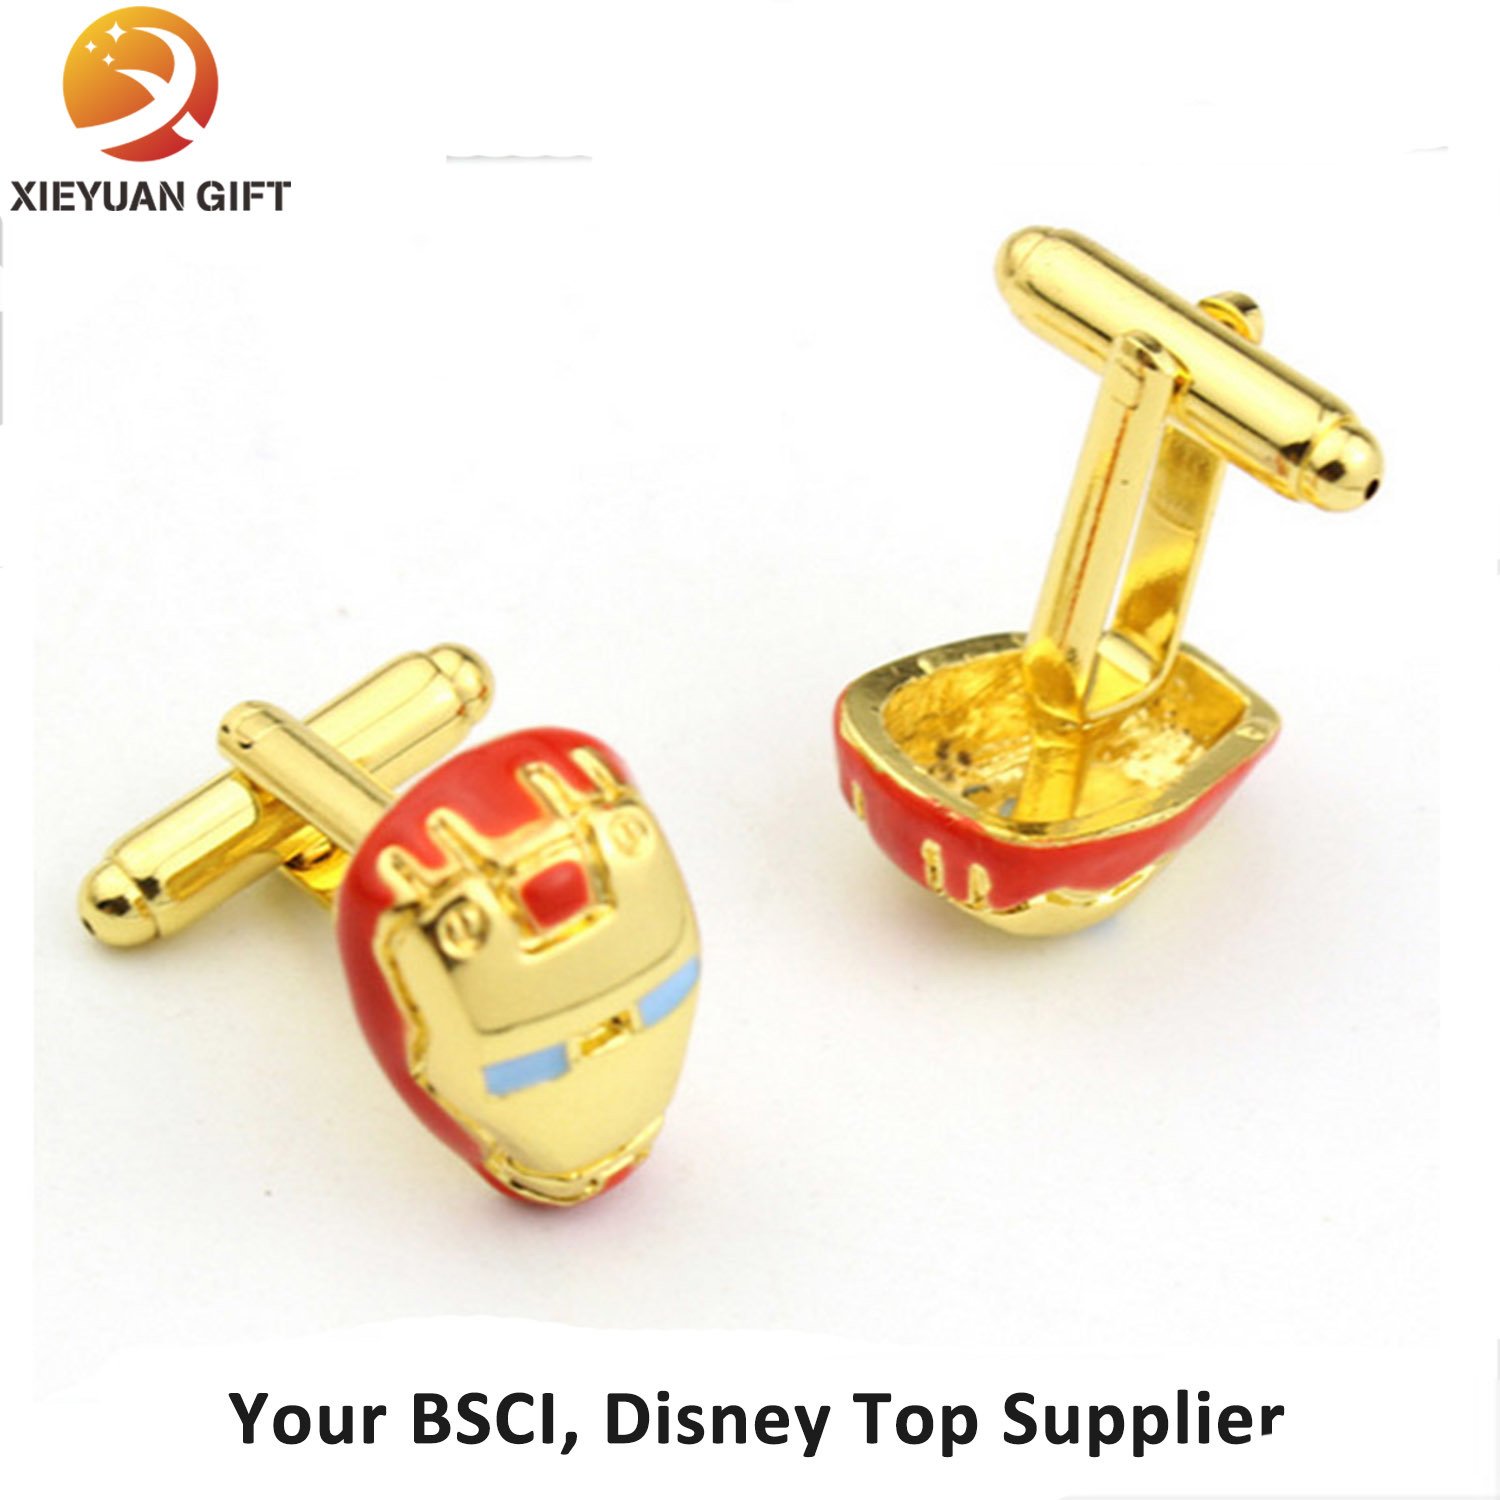 Bling Superman Cufflinks for Gifts